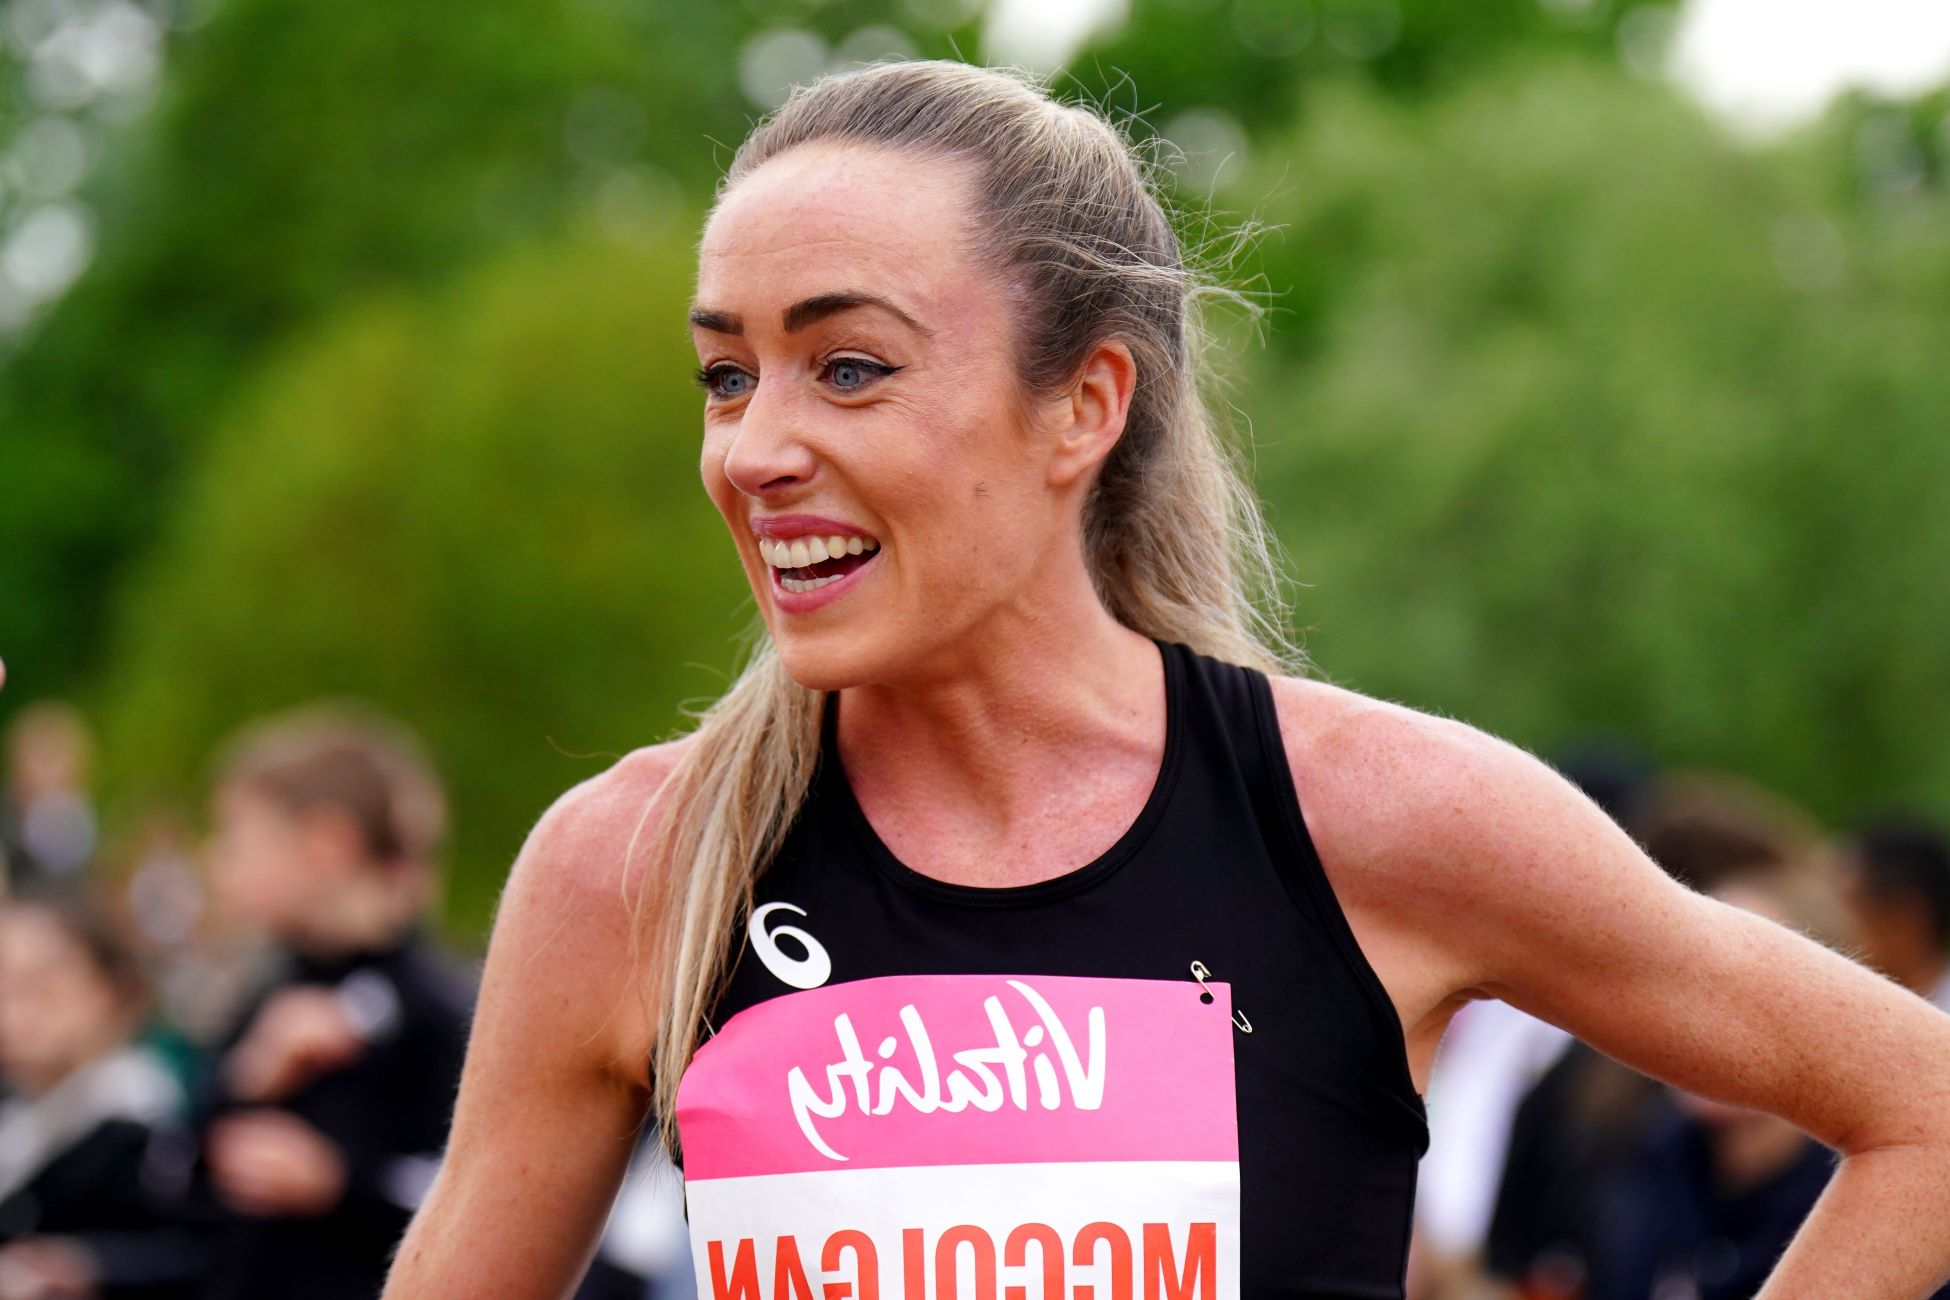 Eilish McColgan's Advice On Running: Embrace Your Authenticity And Confidence